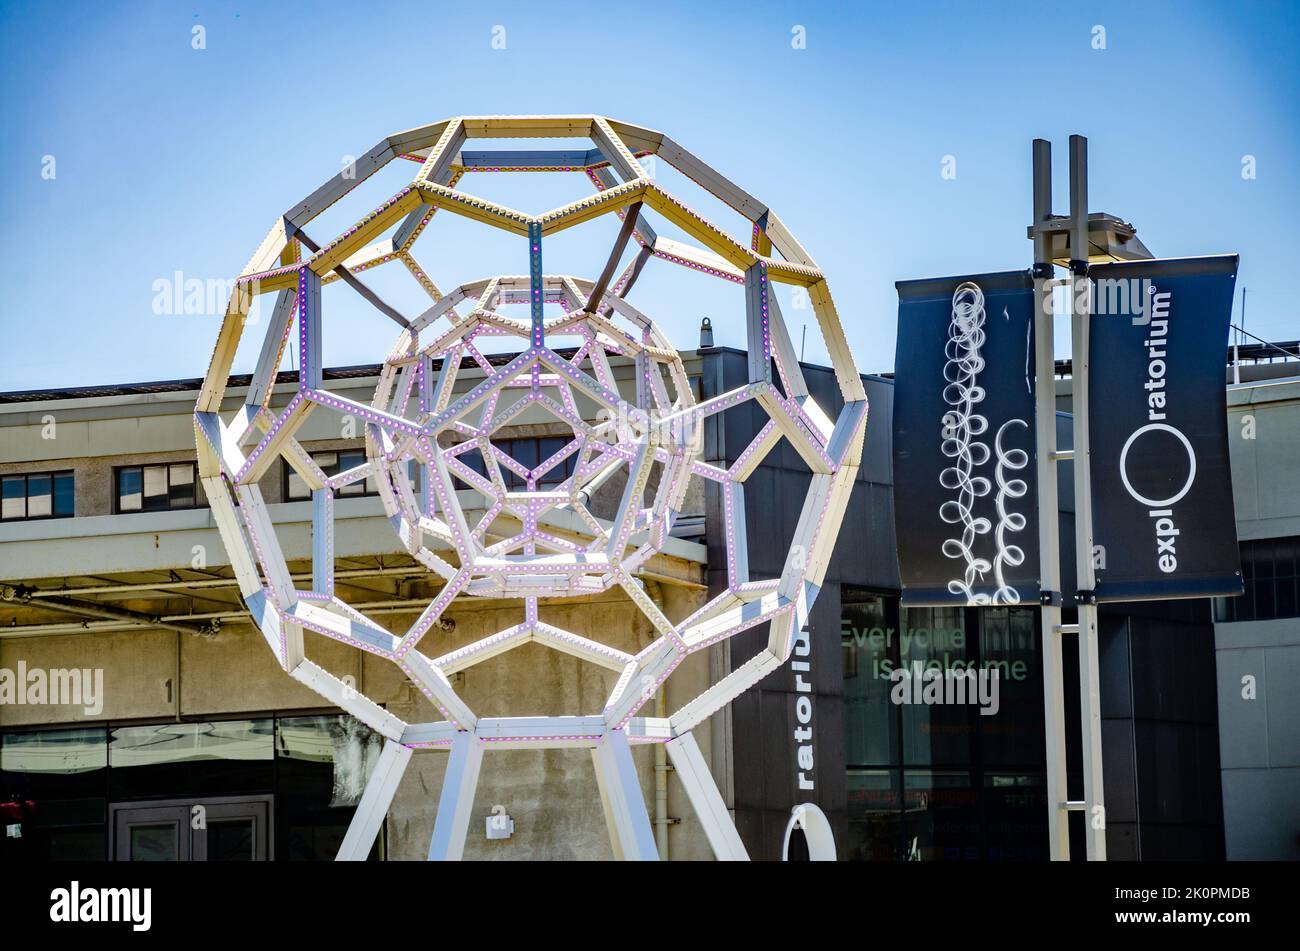 Exploratorium, a science and technology museum at pier 15/17 in San Francisco, California. Stock Photo